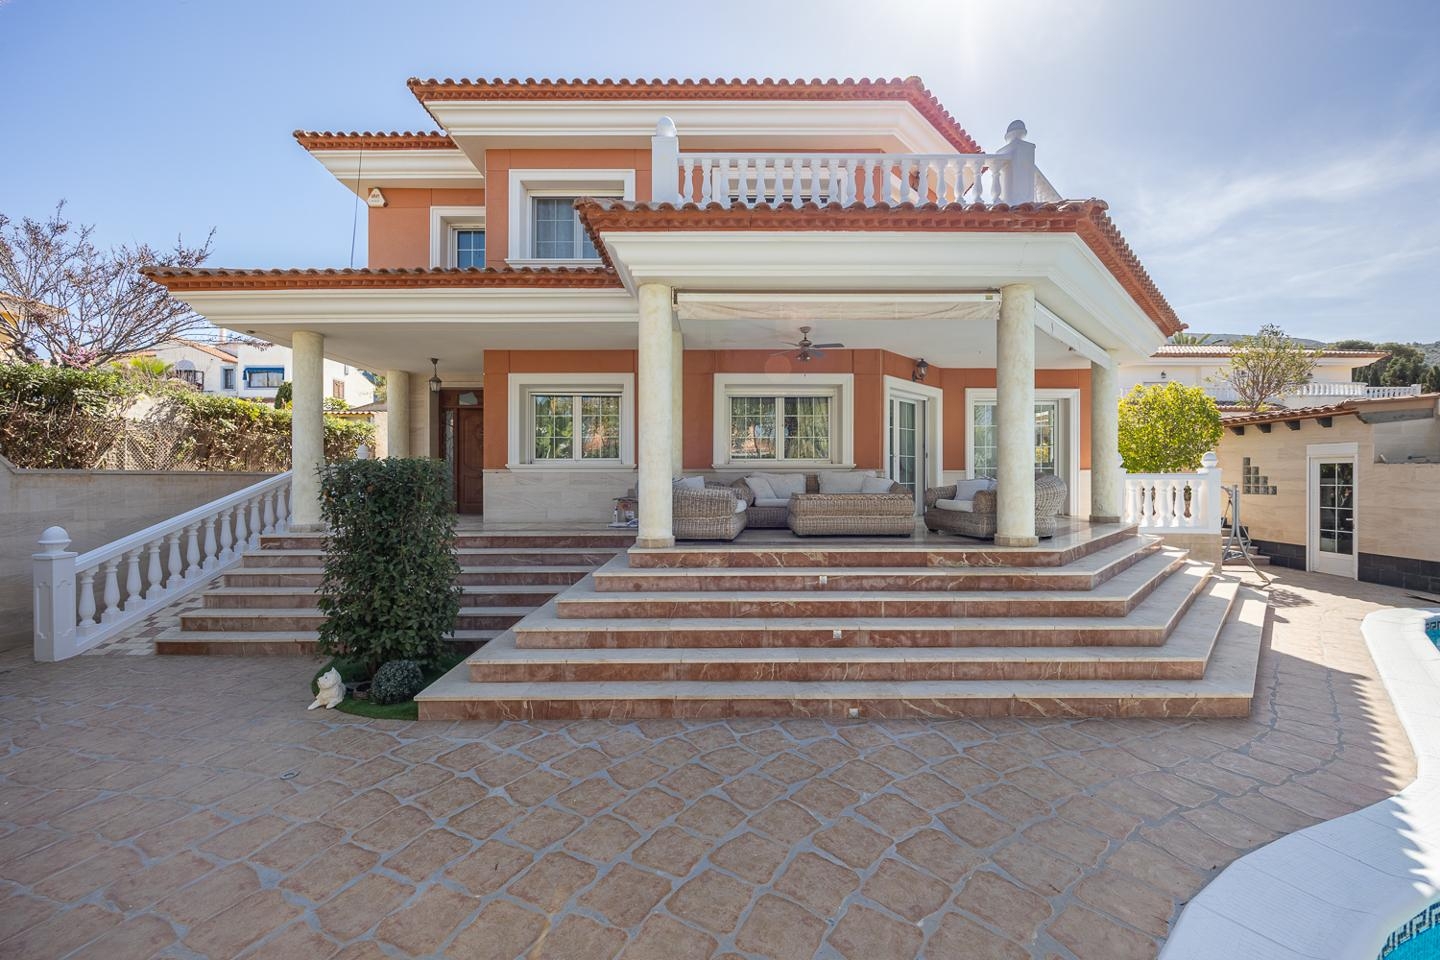 Welcome to this stunning Mediterranean villa located in the heart of the Costa Blanca